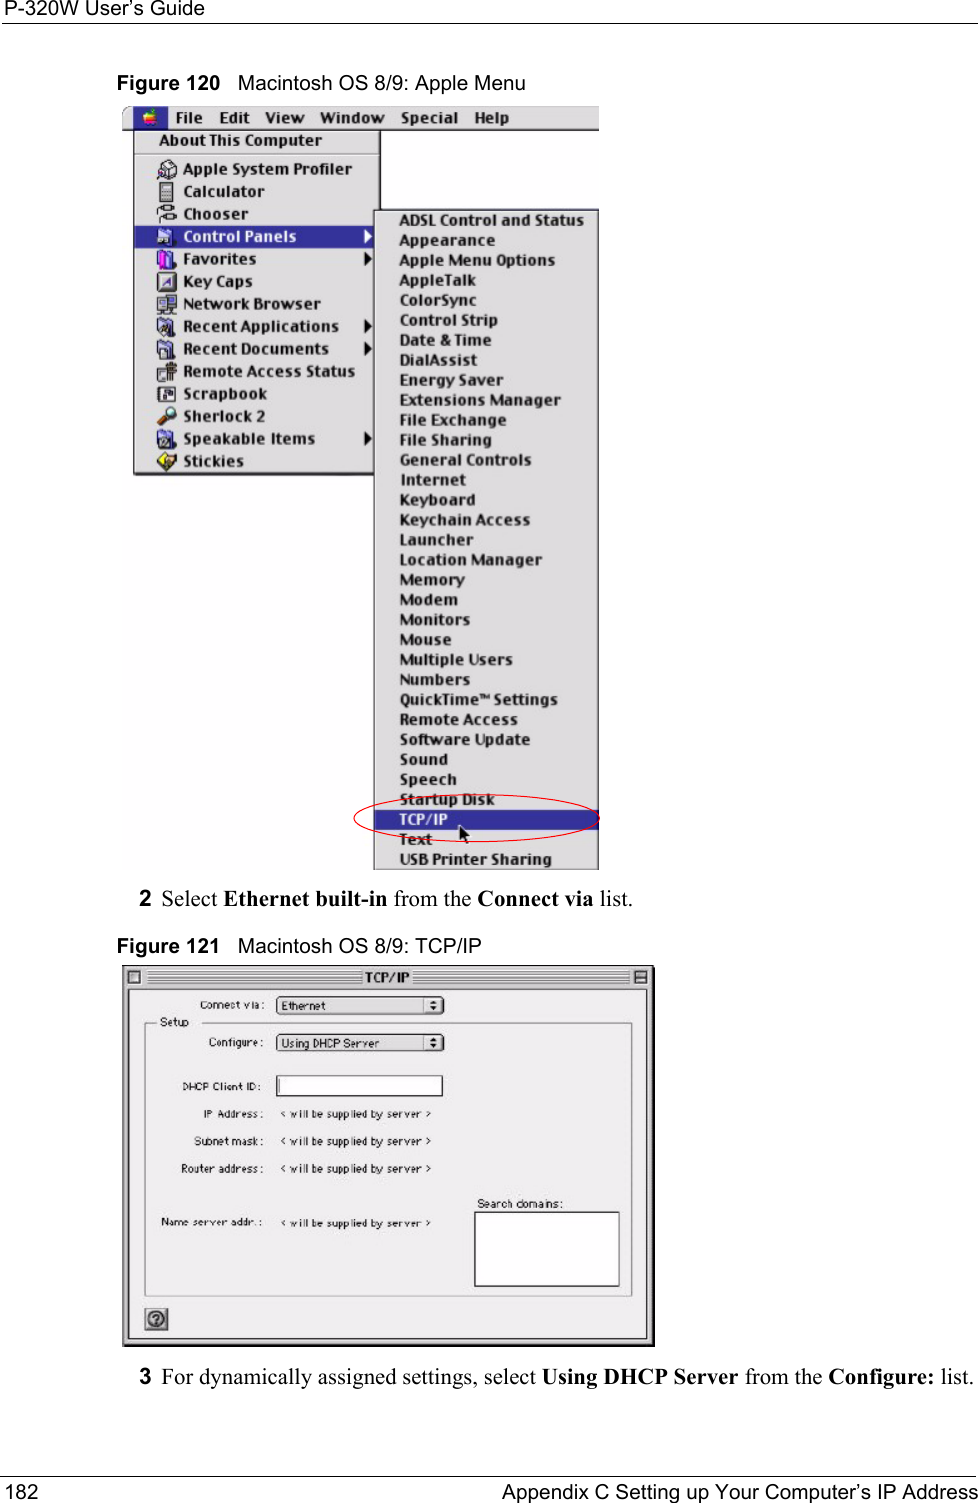 P-320W User’s Guide182  Appendix C Setting up Your Computer’s IP AddressFigure 120   Macintosh OS 8/9: Apple Menu2Select Ethernet built-in from the Connect via list.Figure 121   Macintosh OS 8/9: TCP/IP3For dynamically assigned settings, select Using DHCP Server from the Configure: list.